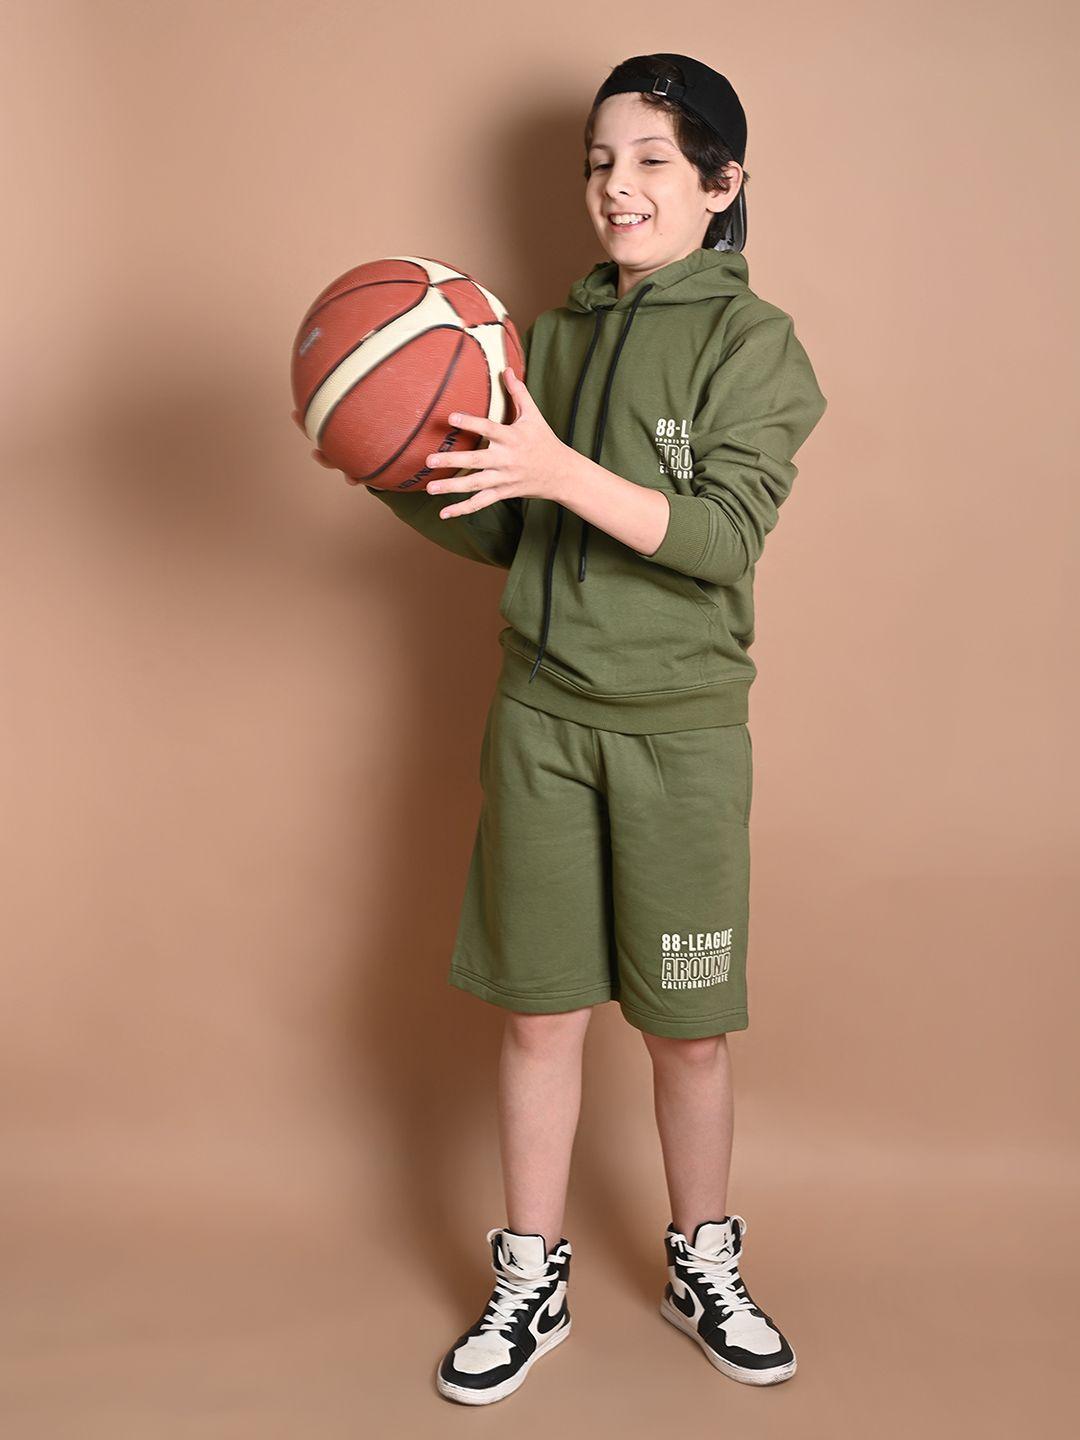 lilpicks-boys-green-&-white-printed-t-shirt-with-shorts